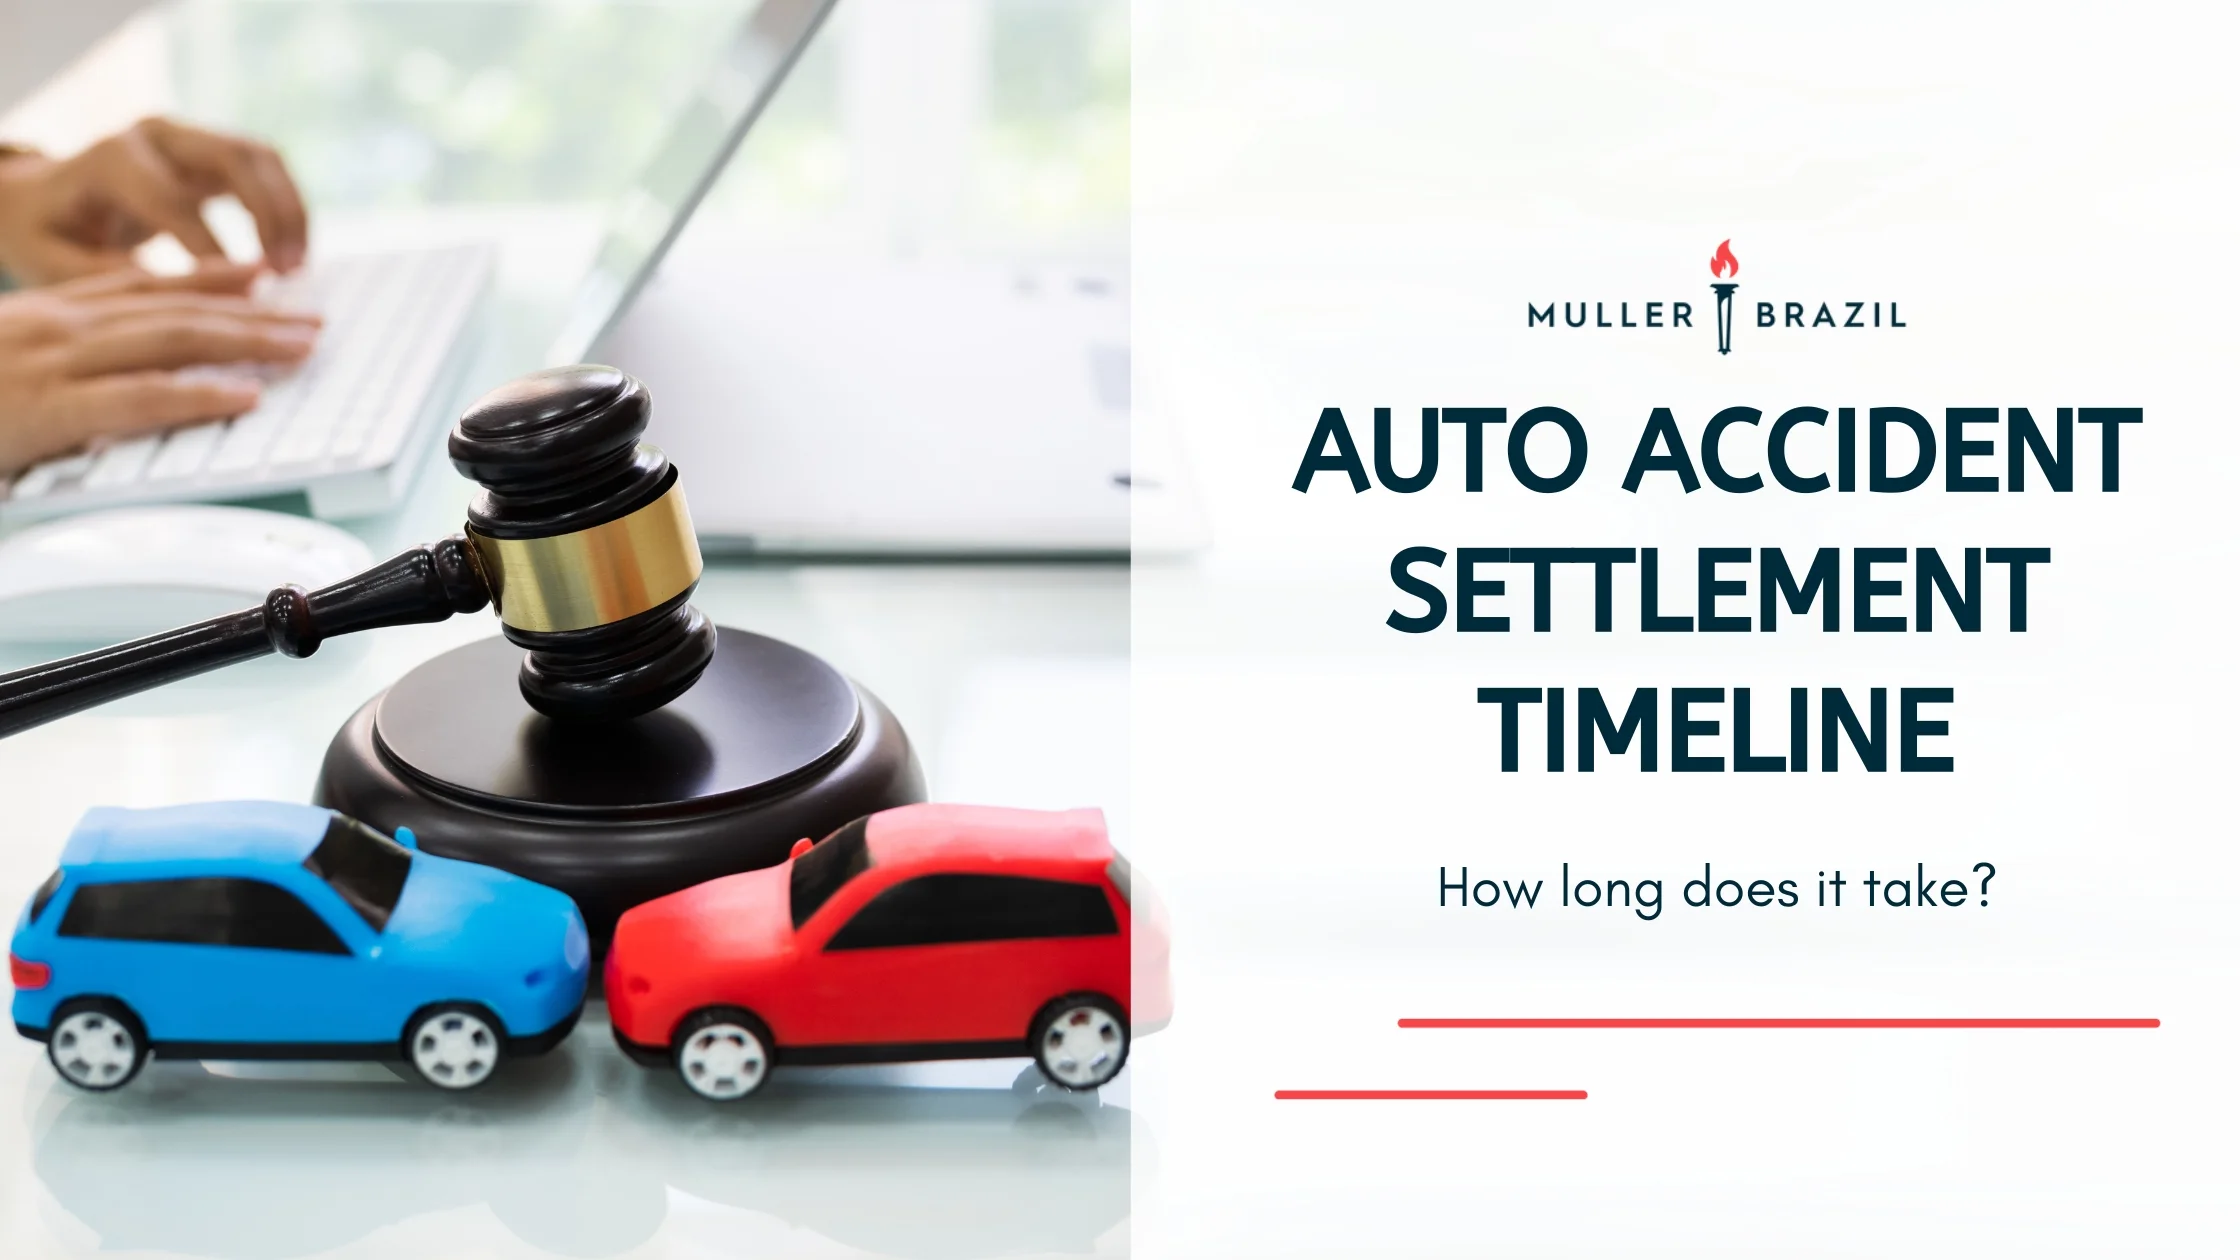 Blog featured image of a gavel on a desk with a blue and red car and a caption that says “auto accident settlement timeline“